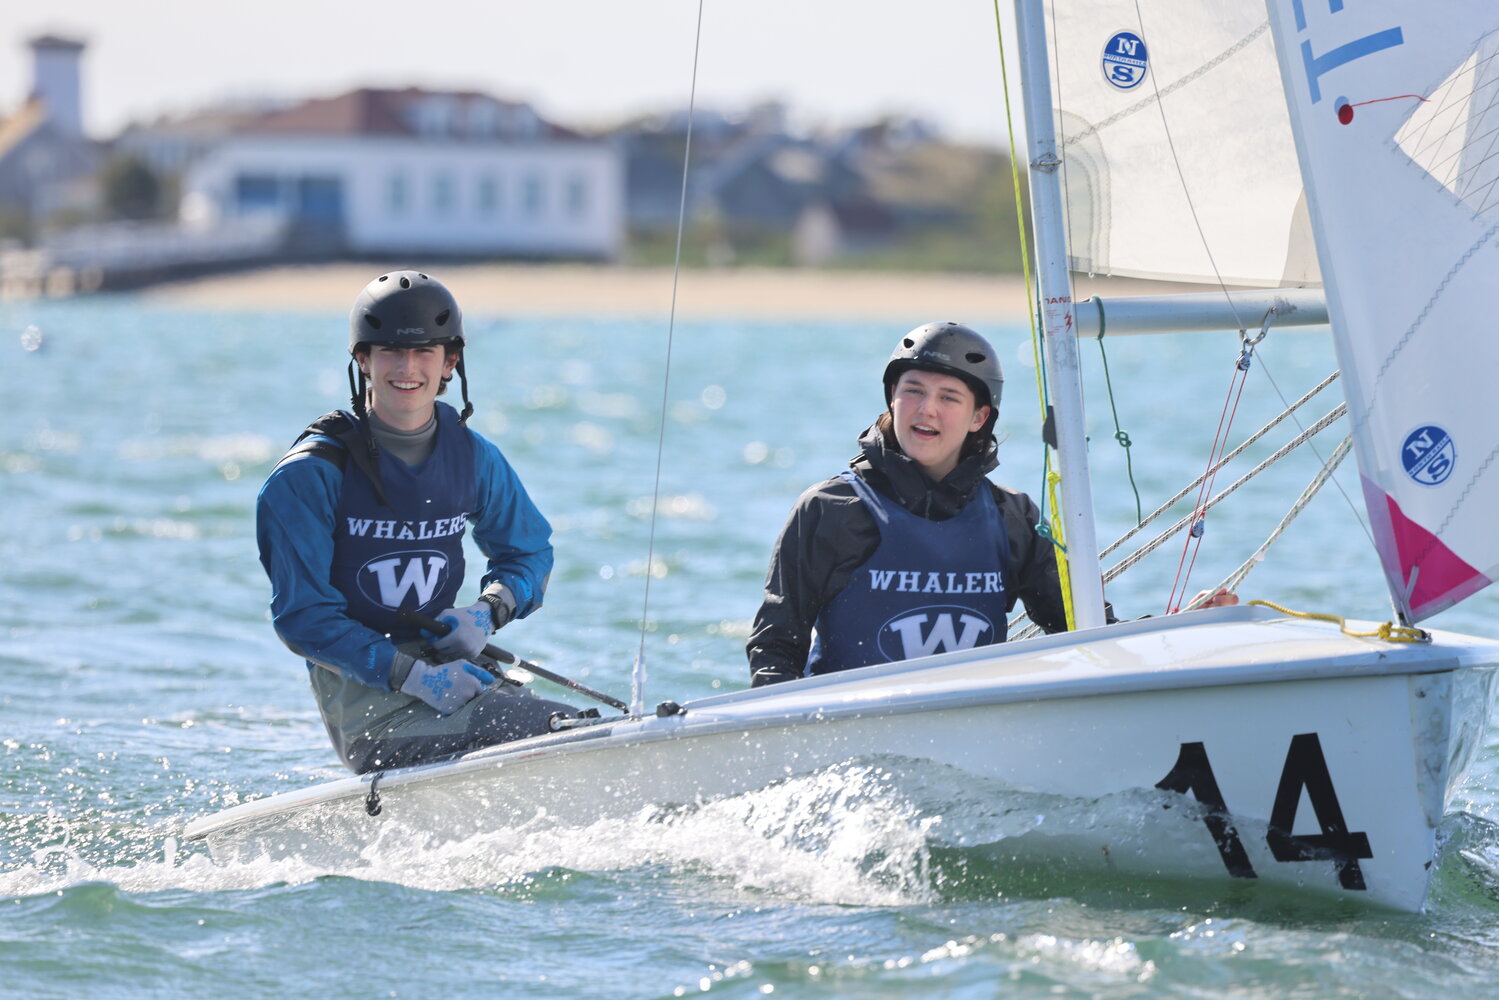 Rory Murray and Alice O'Banion made up one of two boats for the Whalers in Wednesday's Cape & Islands Fleet Championship